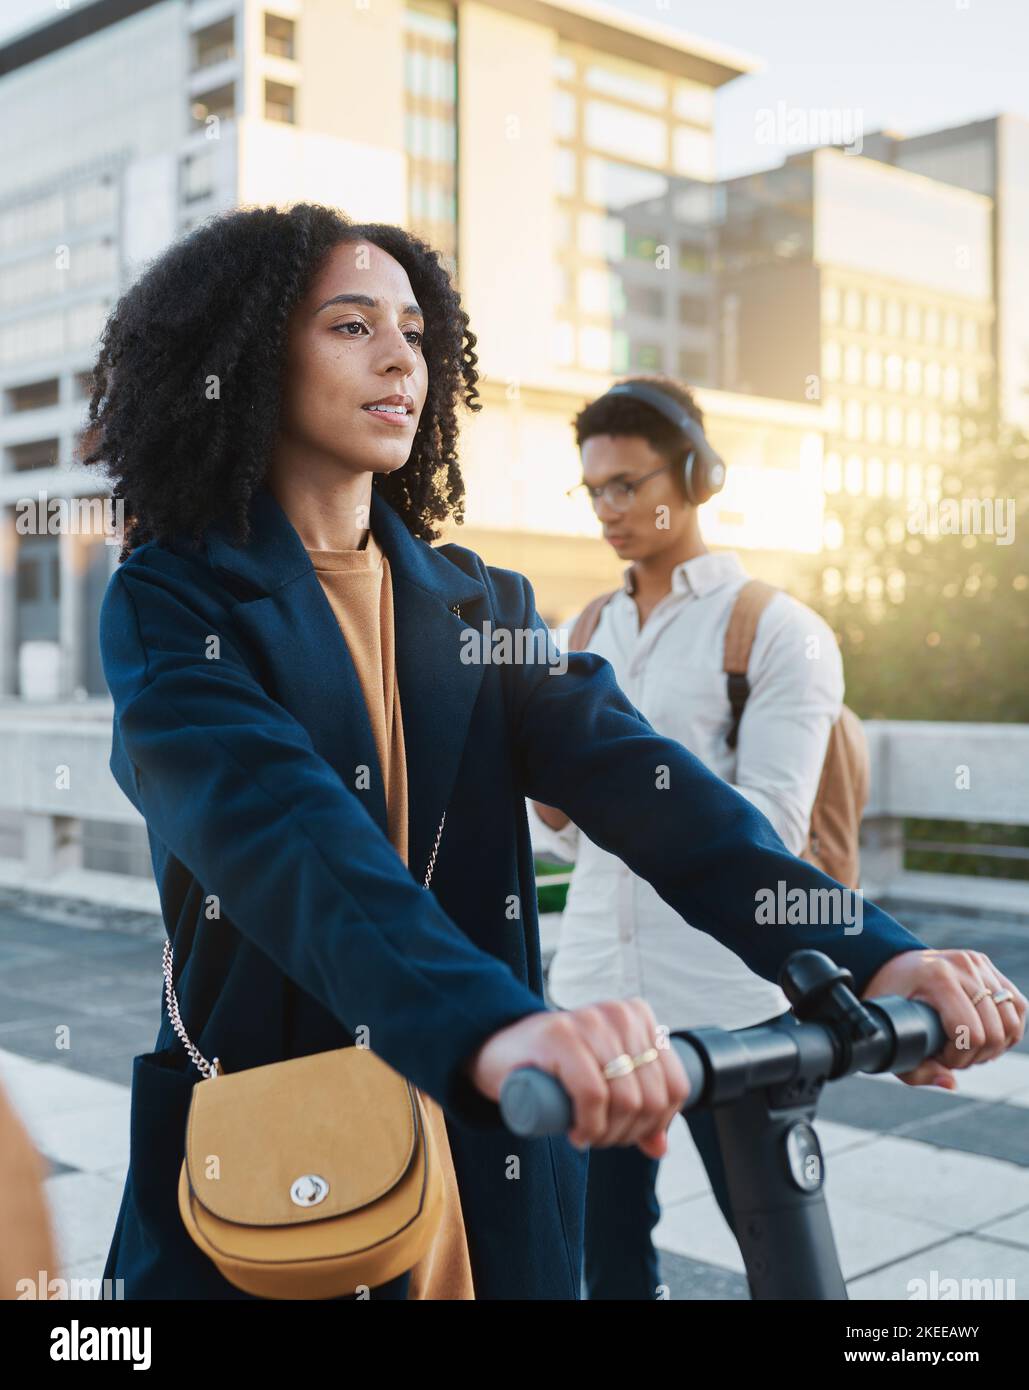 City, electric scooter and commute with a business black woman riding transport on her way to work. Travel, eco friendly and carbon footprint with a Stock Photo